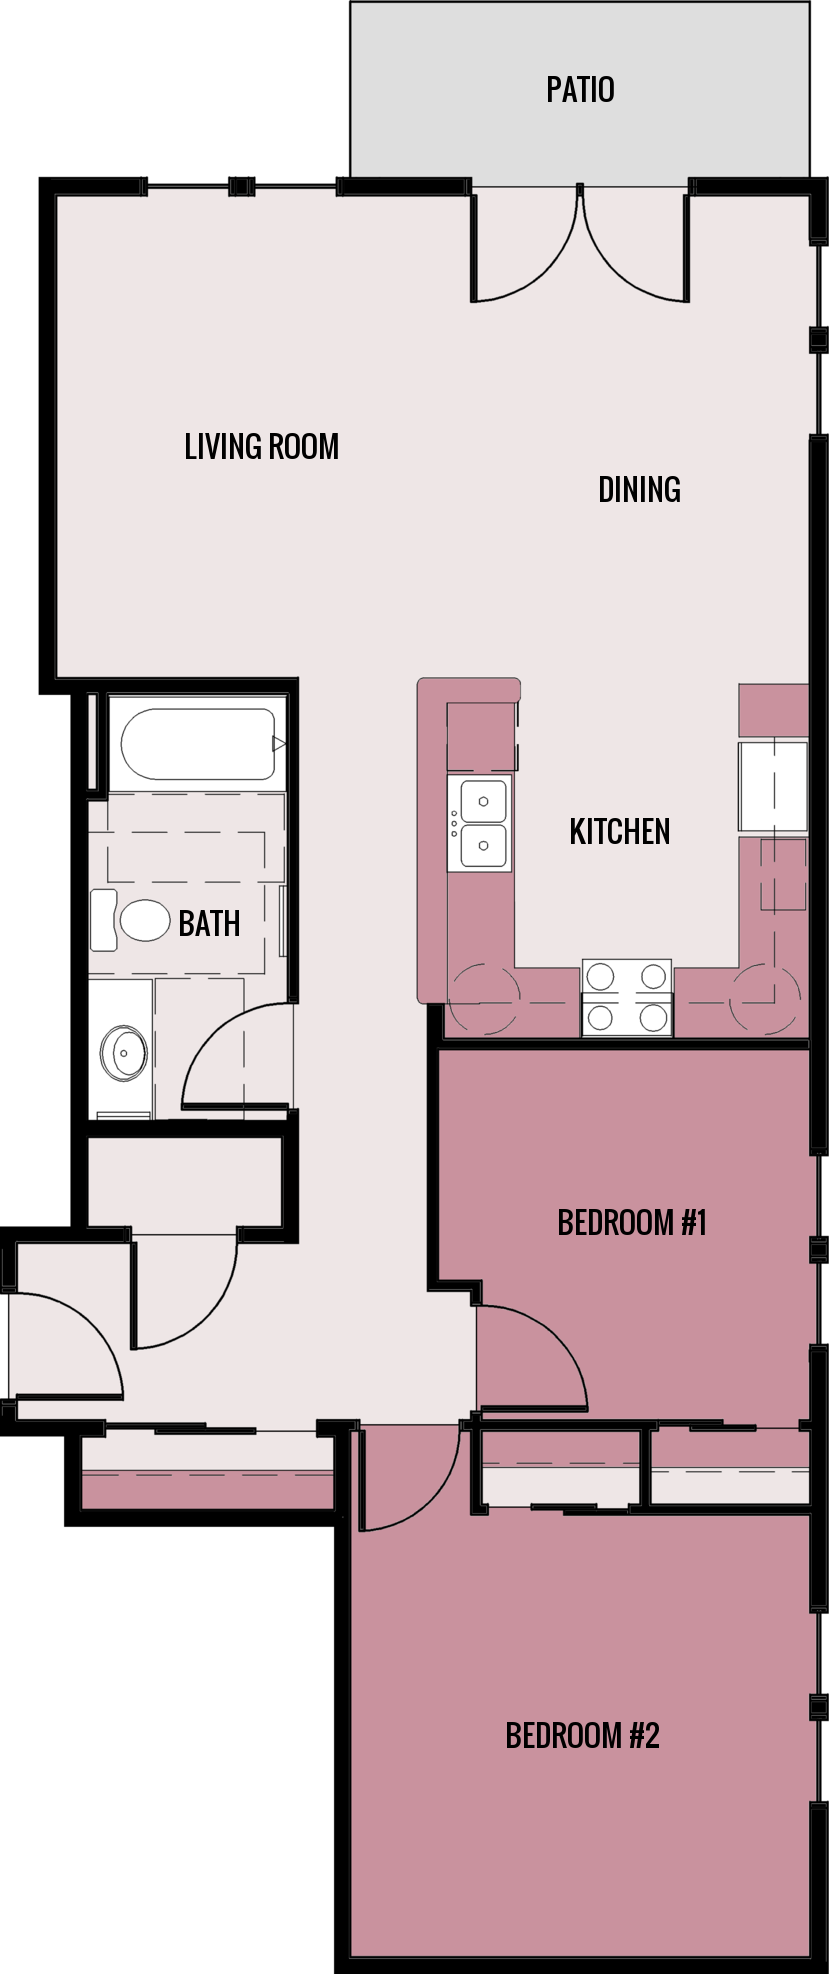 Floor Plans of Prince Hall Village in Milwaukee, WI